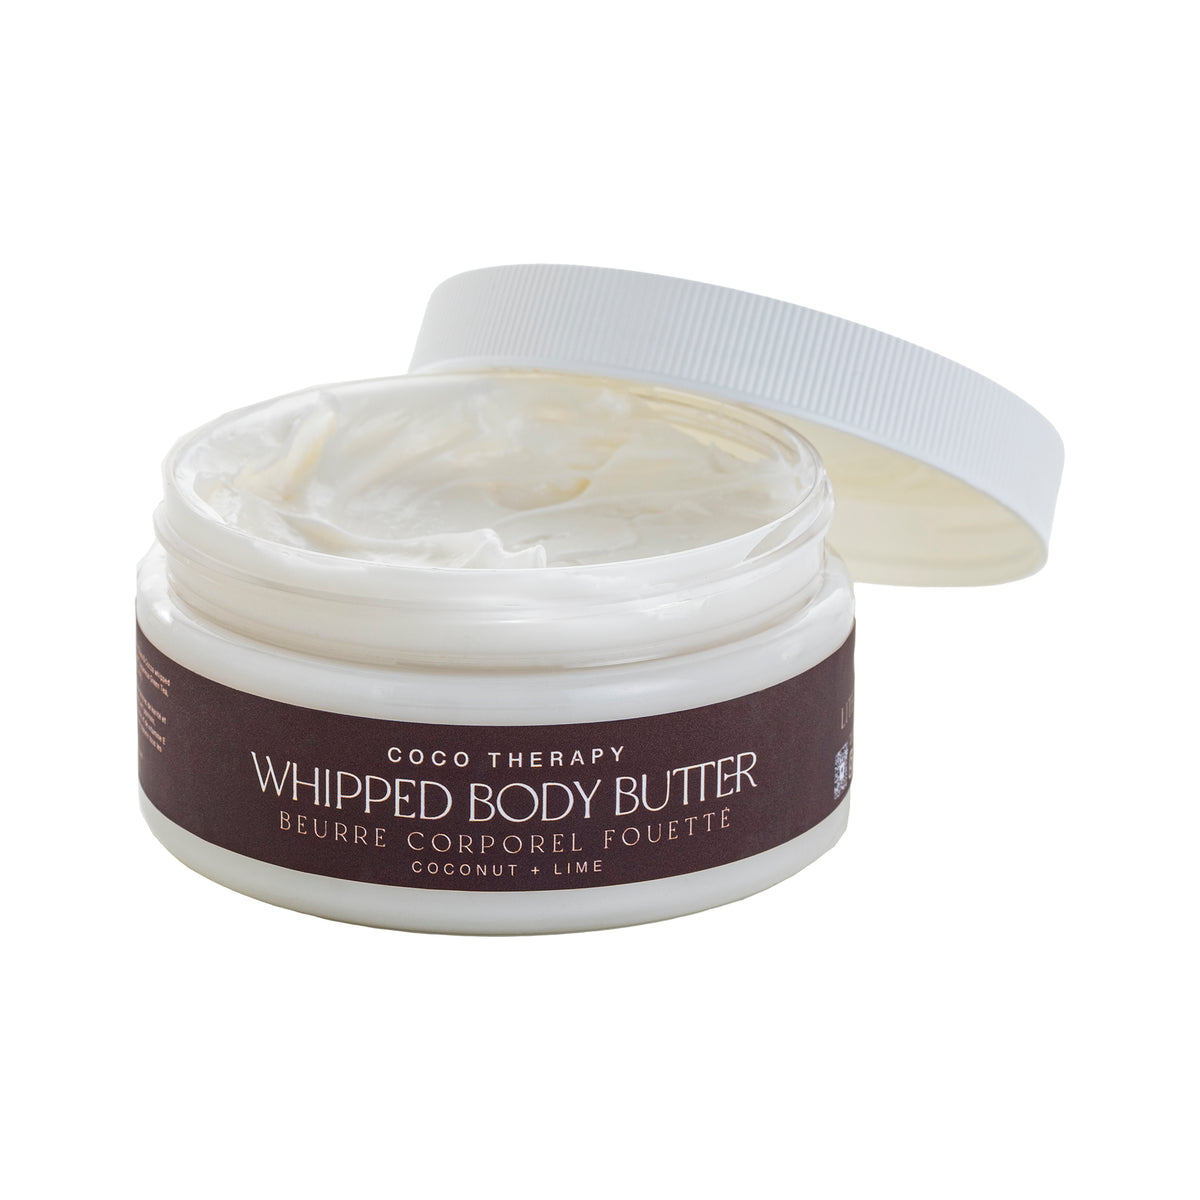 Whipped Body Butter - COCO THERAPY